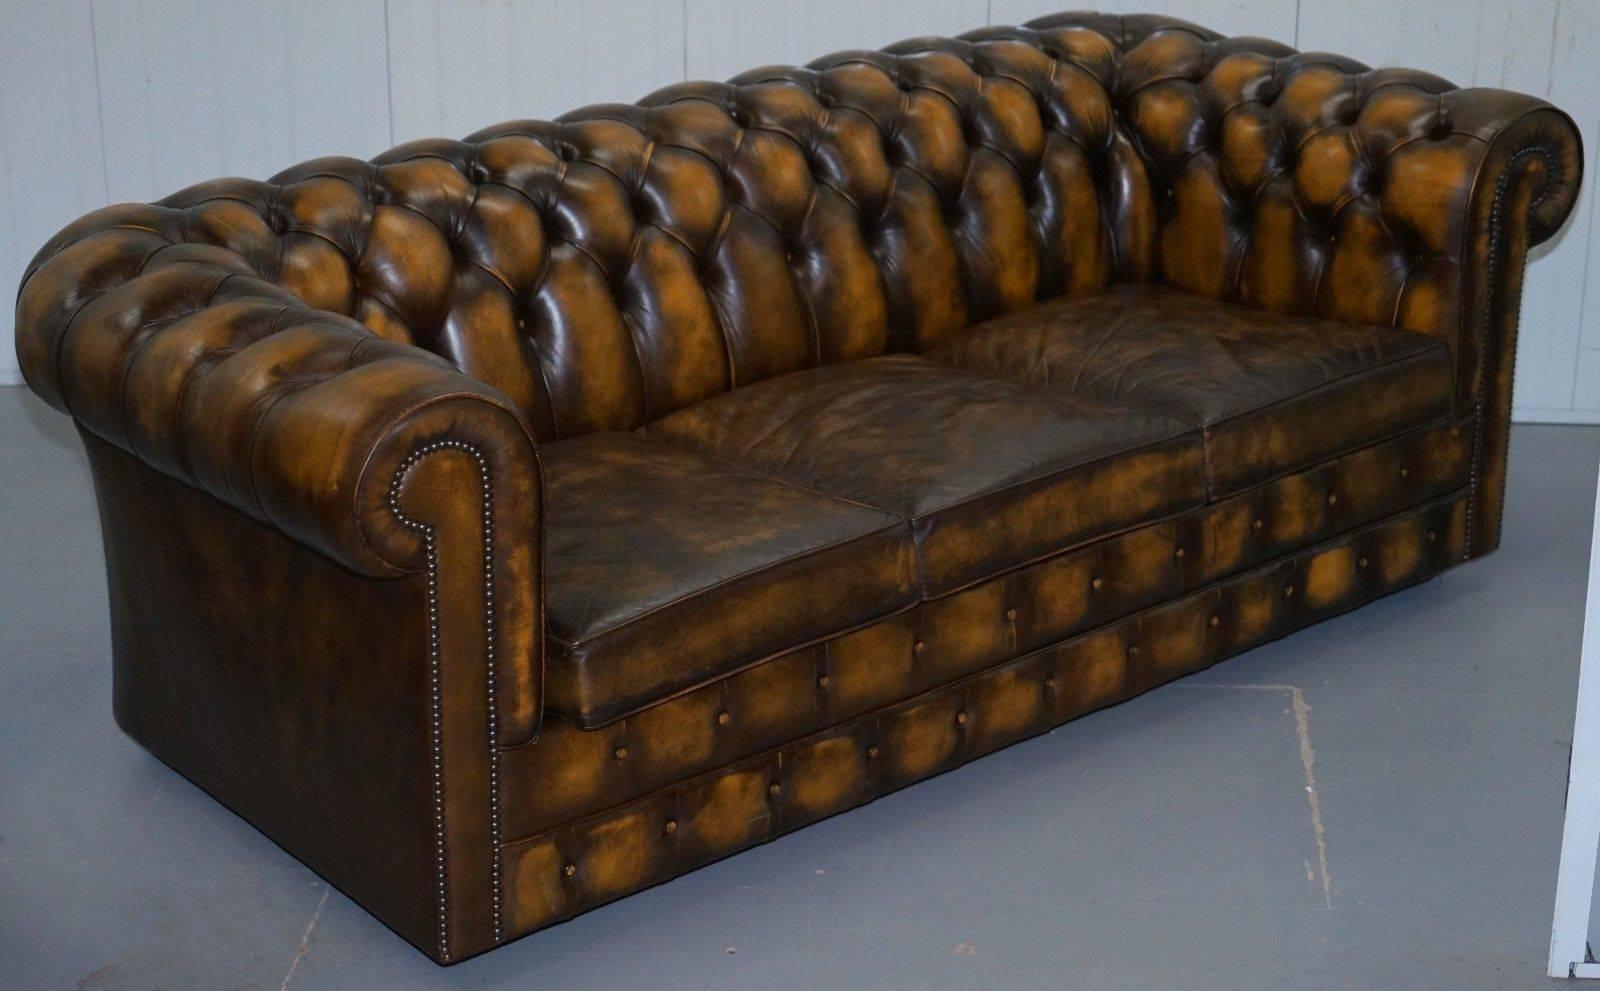 Substantial Hand Dyed Aged Brown Leather Chesterfield Sofa Bed from